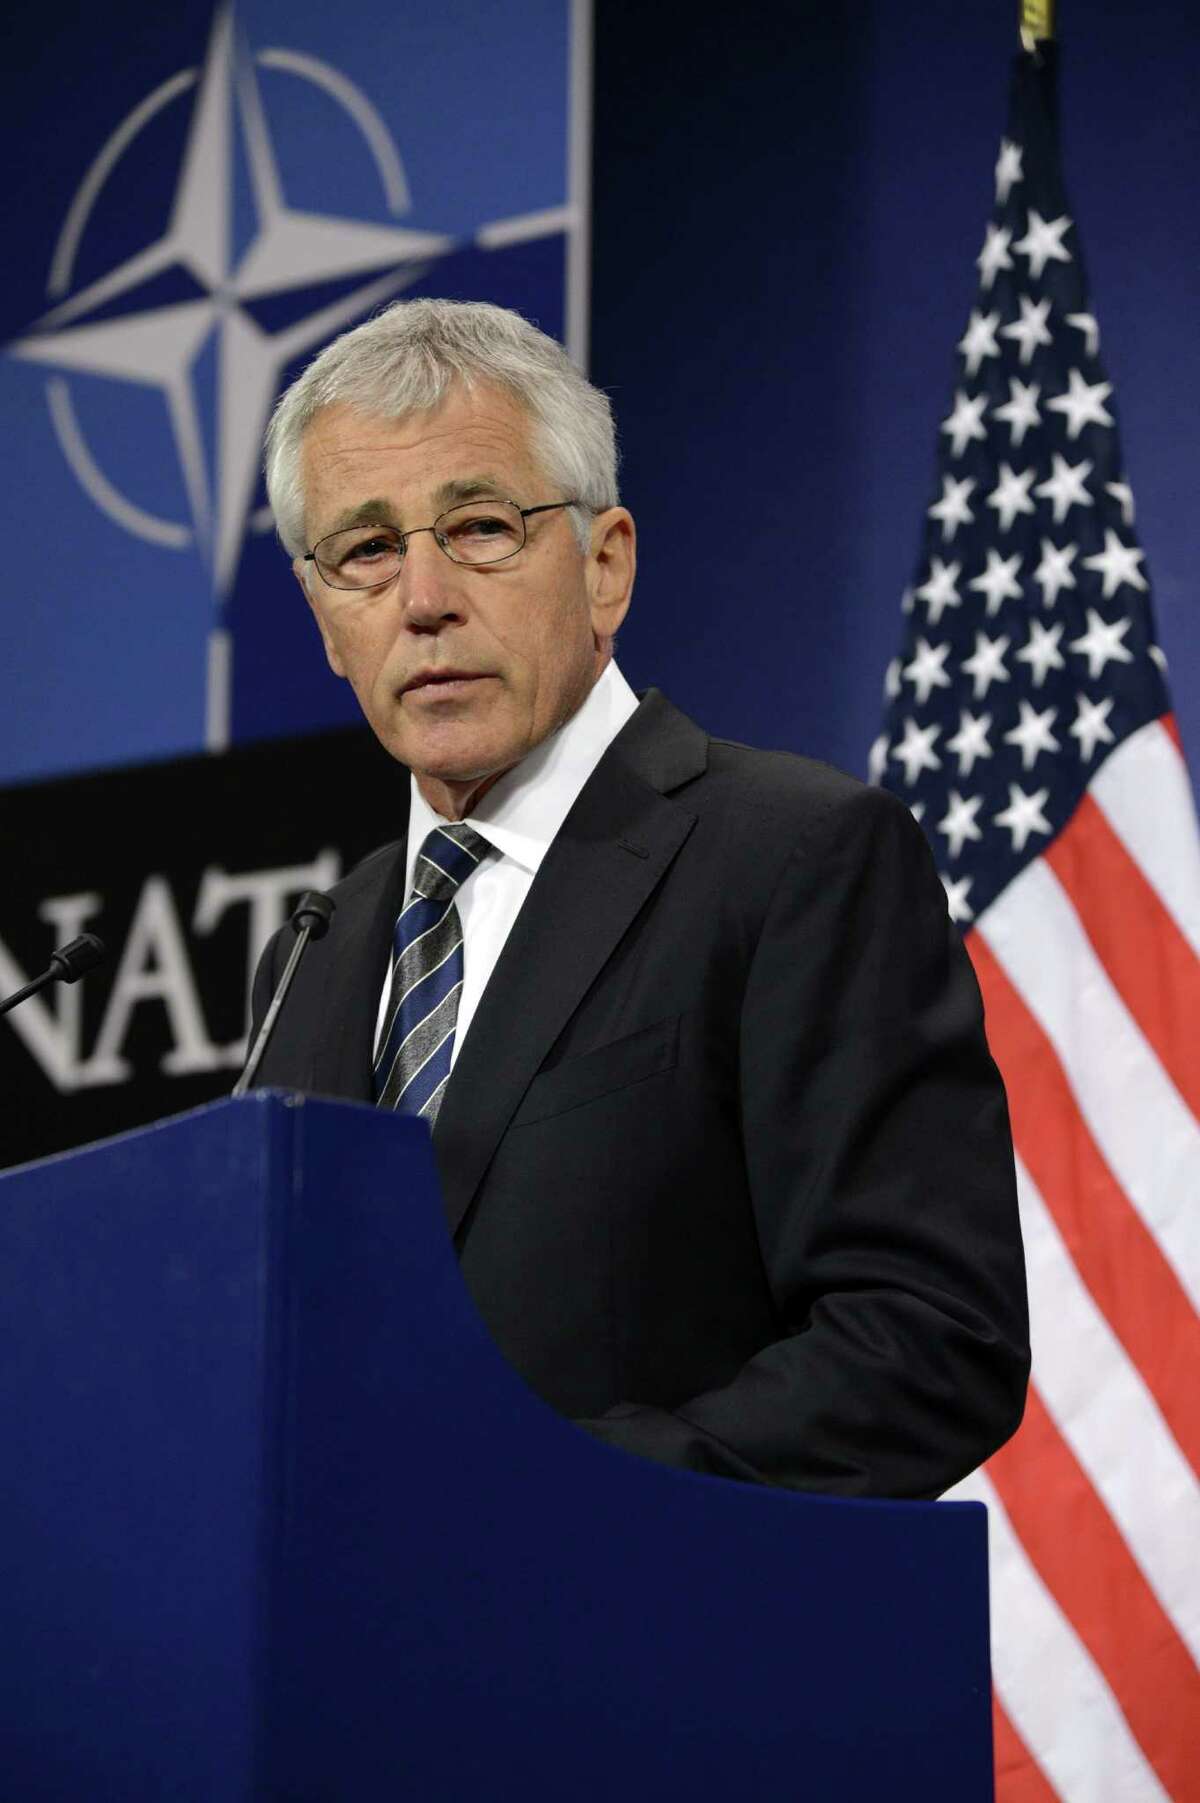 Secretary of Defense Chuck Hagel said the denial “furthers prejudice, which DoD has fought to extinguish.”